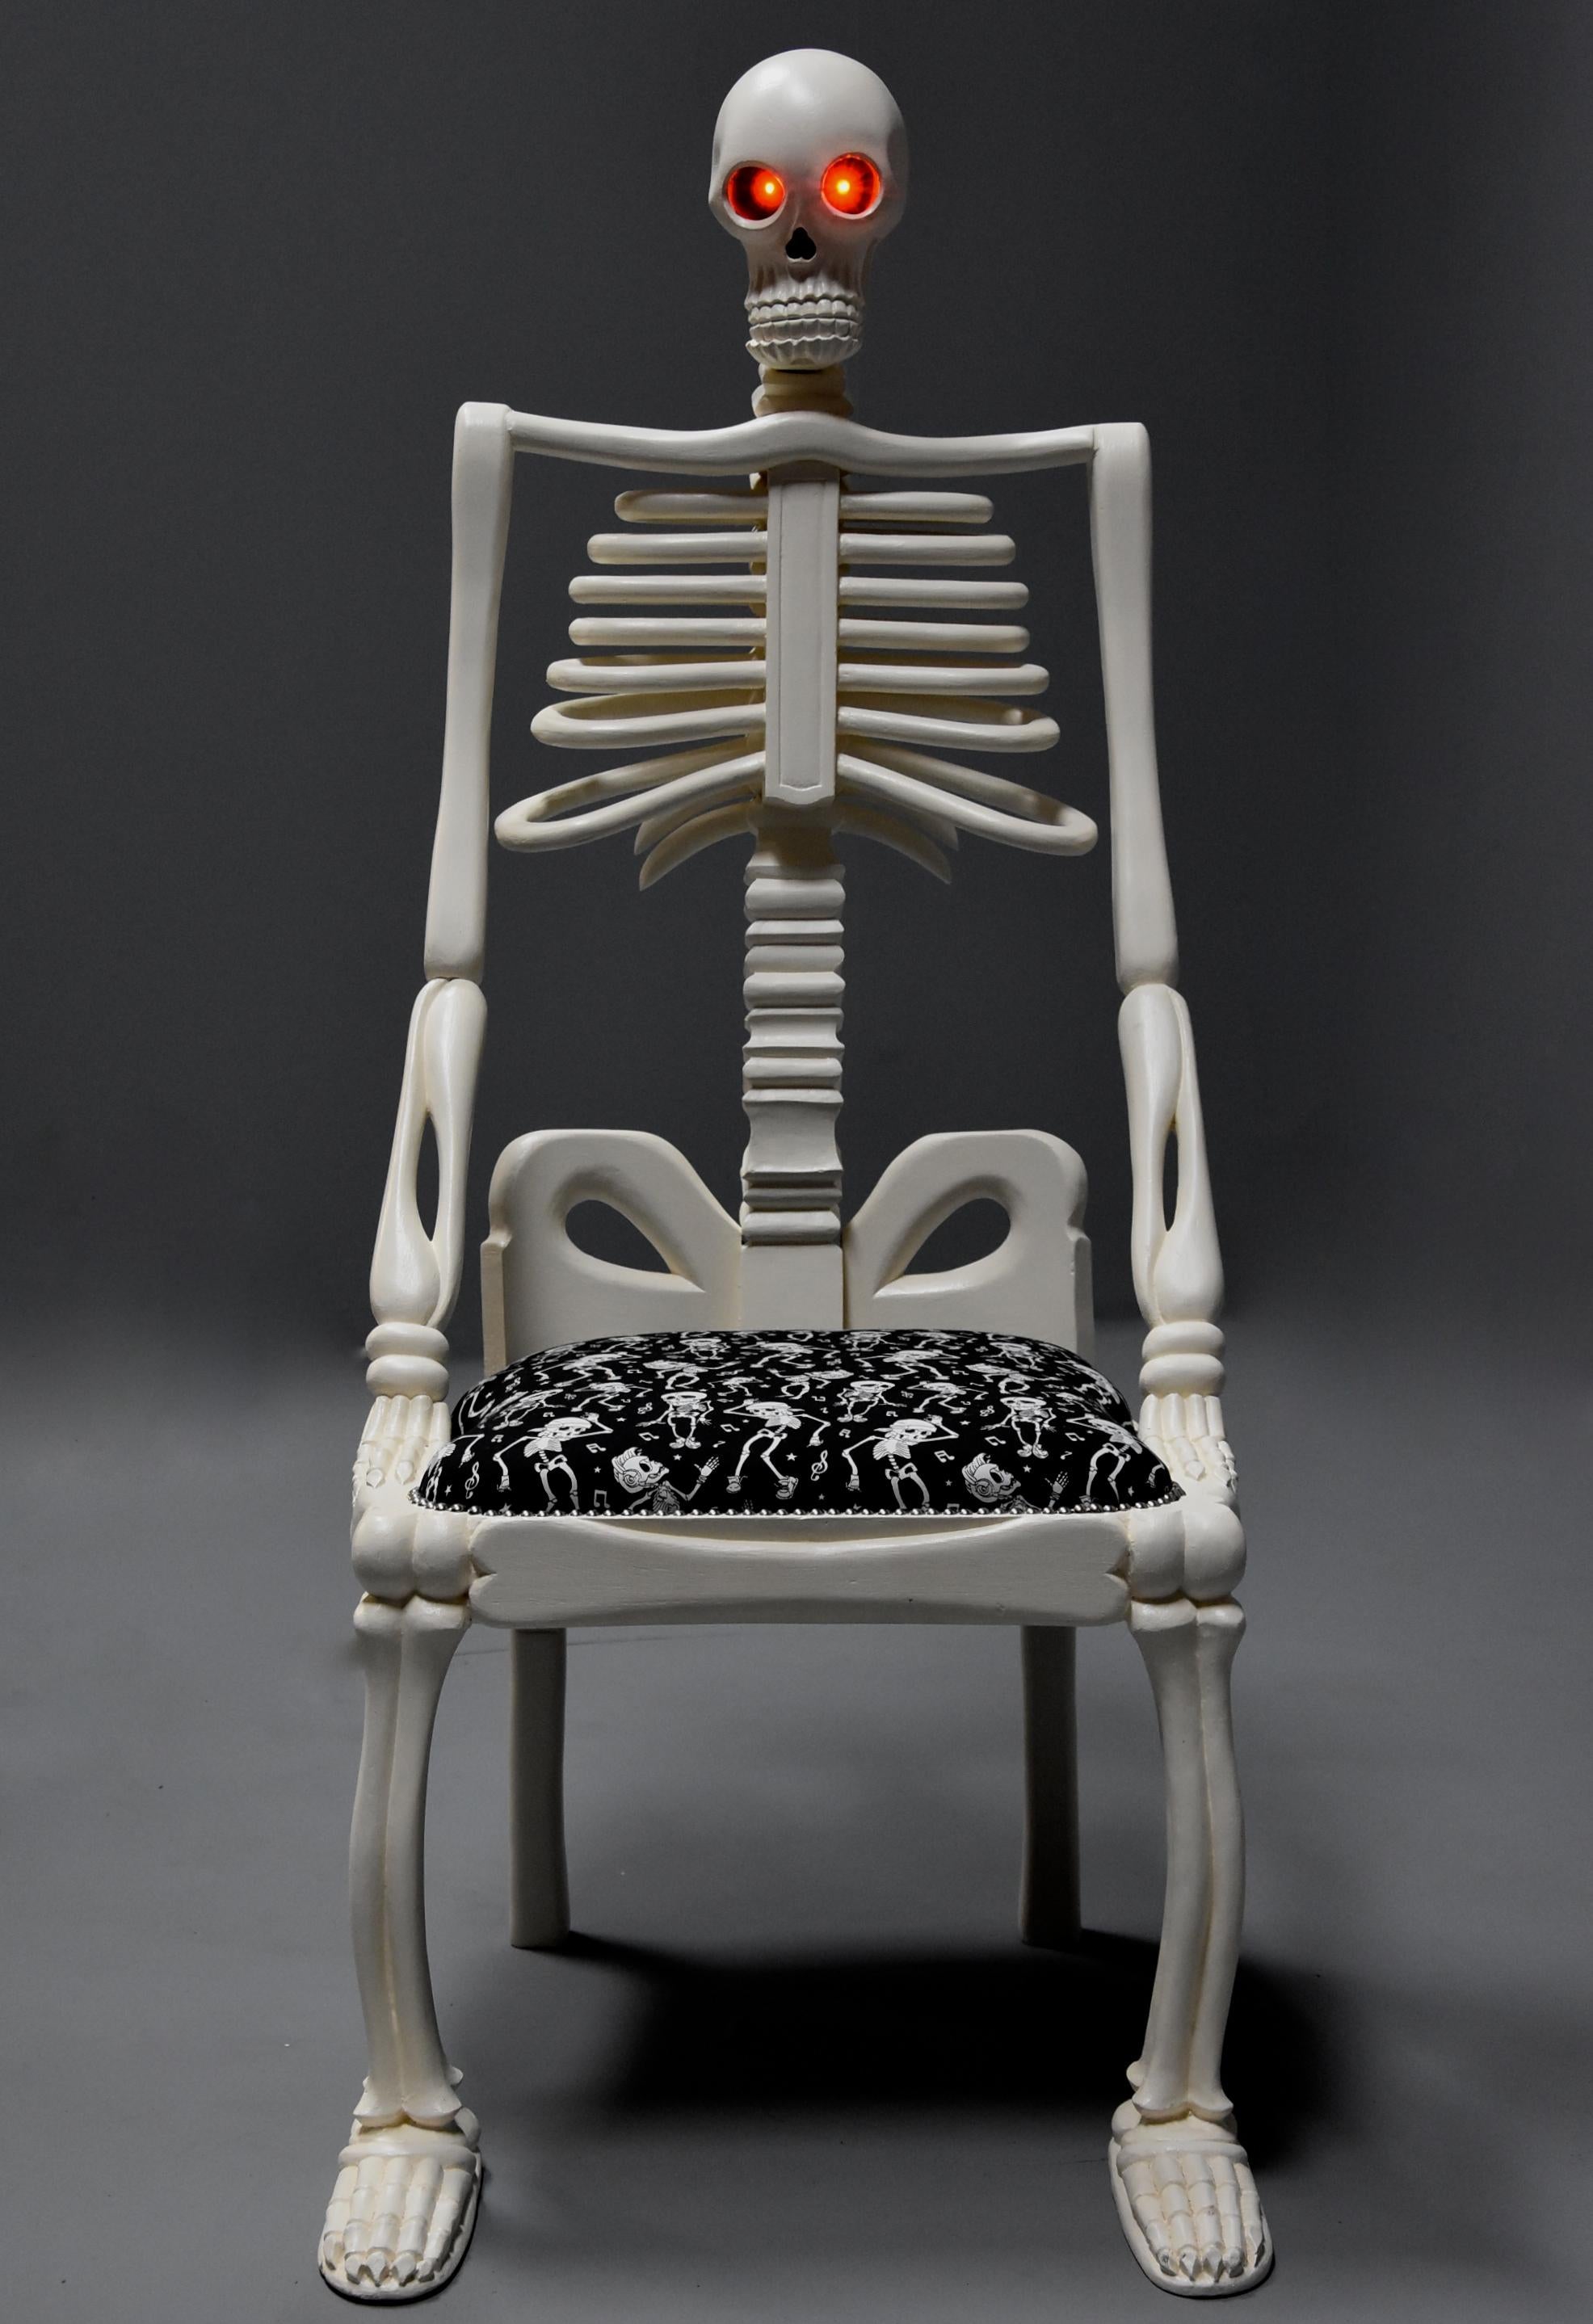 Highly decorative and unusual hand-carved and painted wooden skeleton chair.

This quirky chair consists of a hand carved and painted wooden chair in the form of a skeleton, the skull head having LED lights in the eye sockets that illuminate with